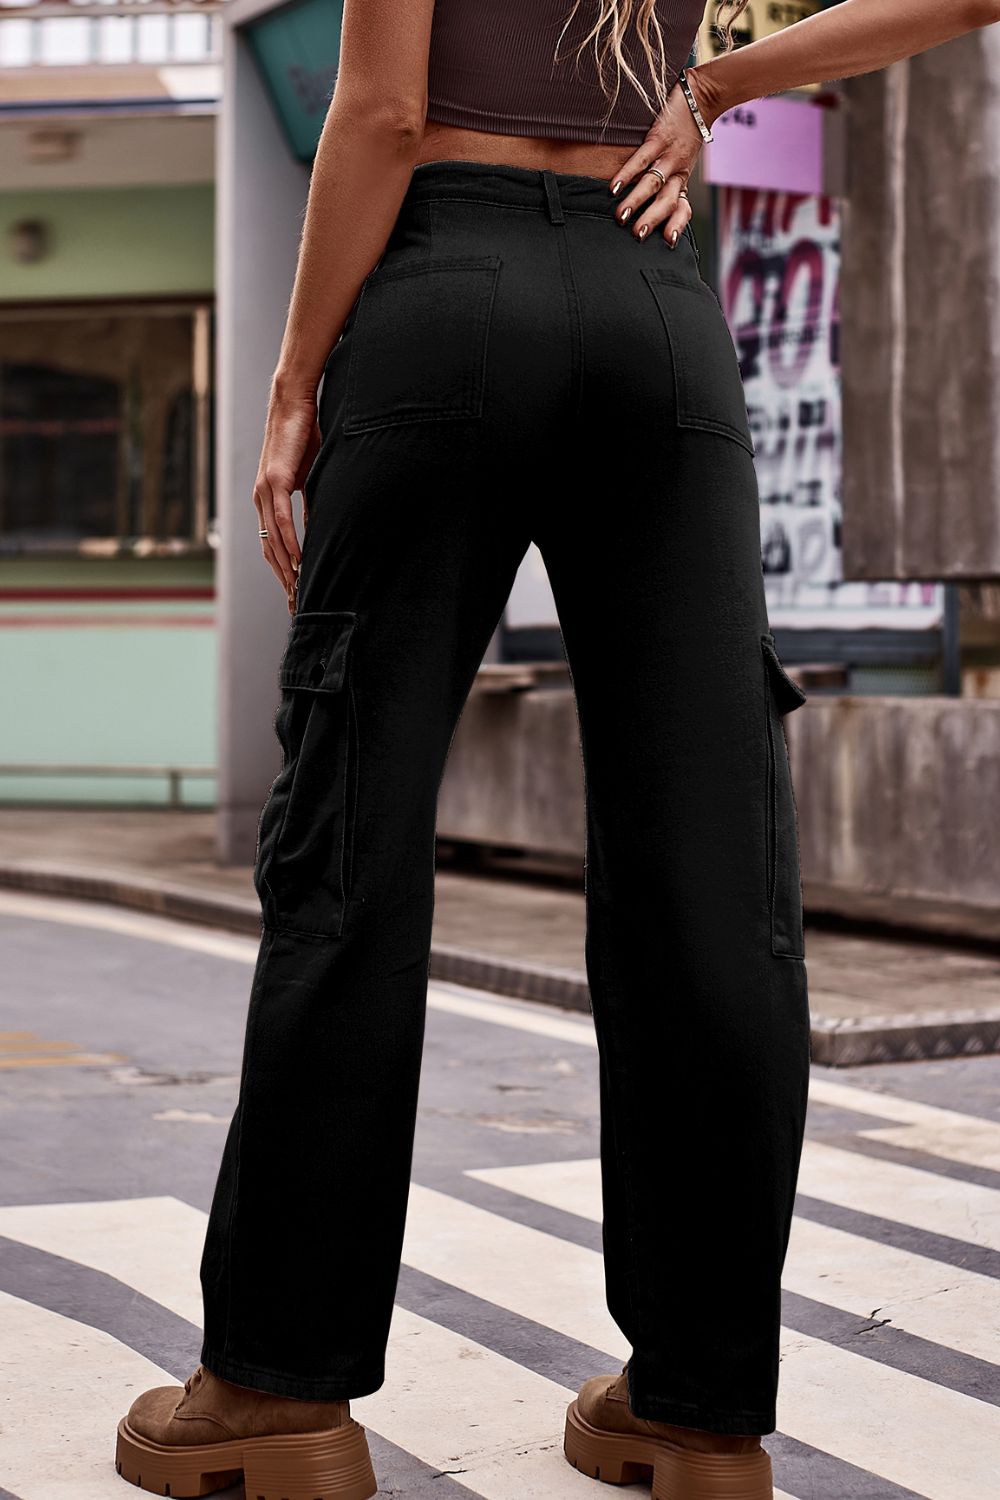 Black Buttoned Loose Fit Jeans with Pockets Sentient Beauty Fashions Apparel & Accessories